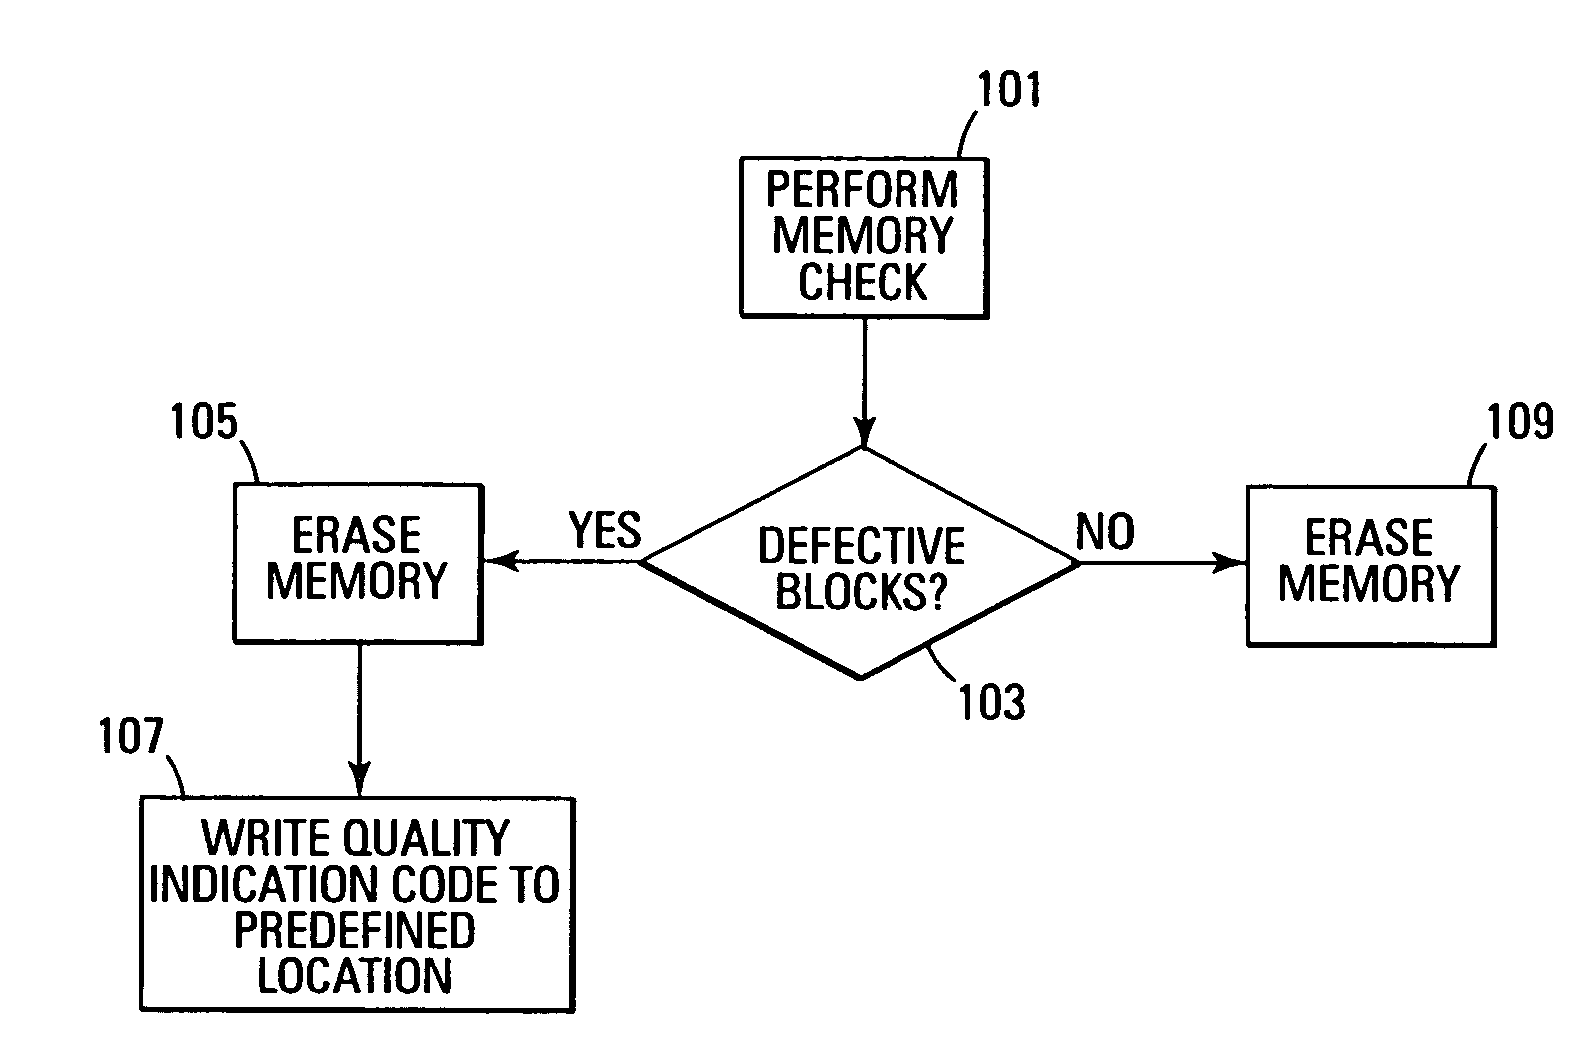 Memory block quality identification in a memory device